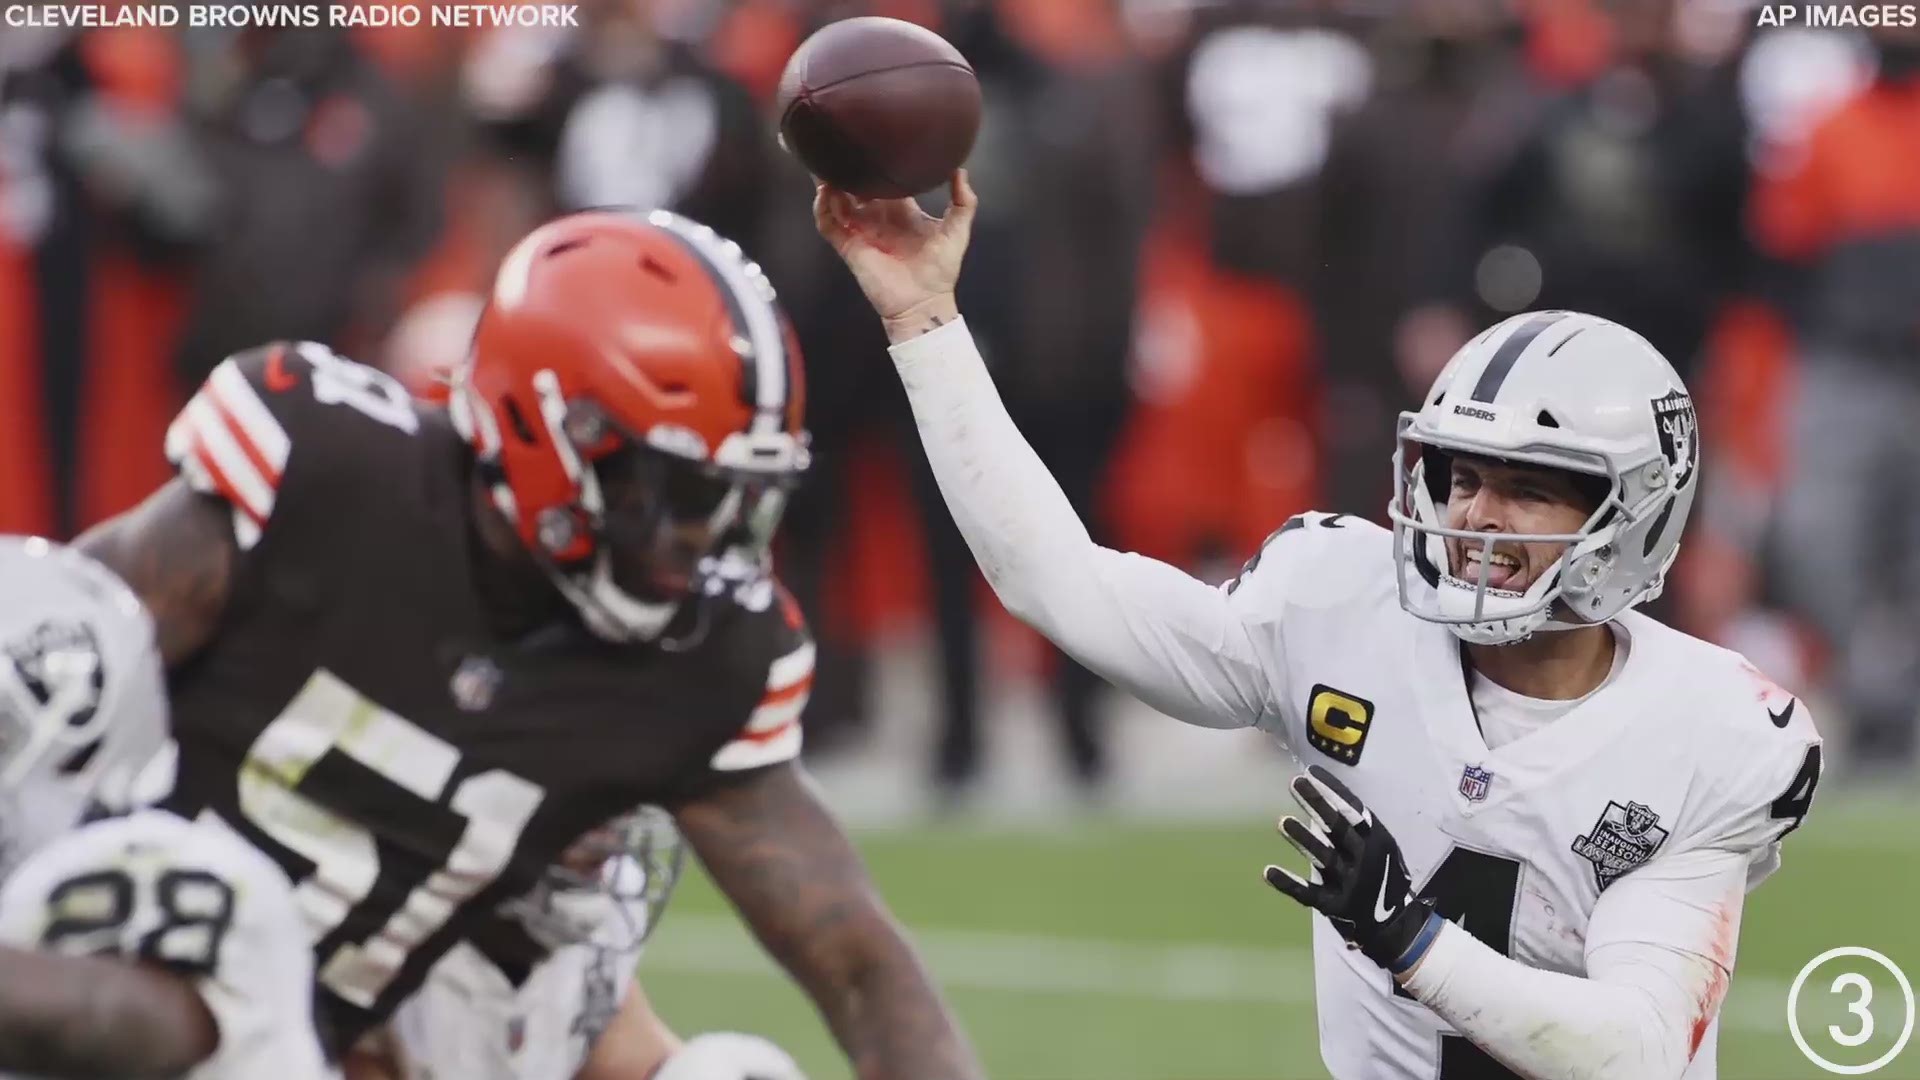 Las Vegas Raiders receiver Hunter Renfrow scored a controversial go-ahead touchdown in their win over the Cleveland Browns on Sunday.